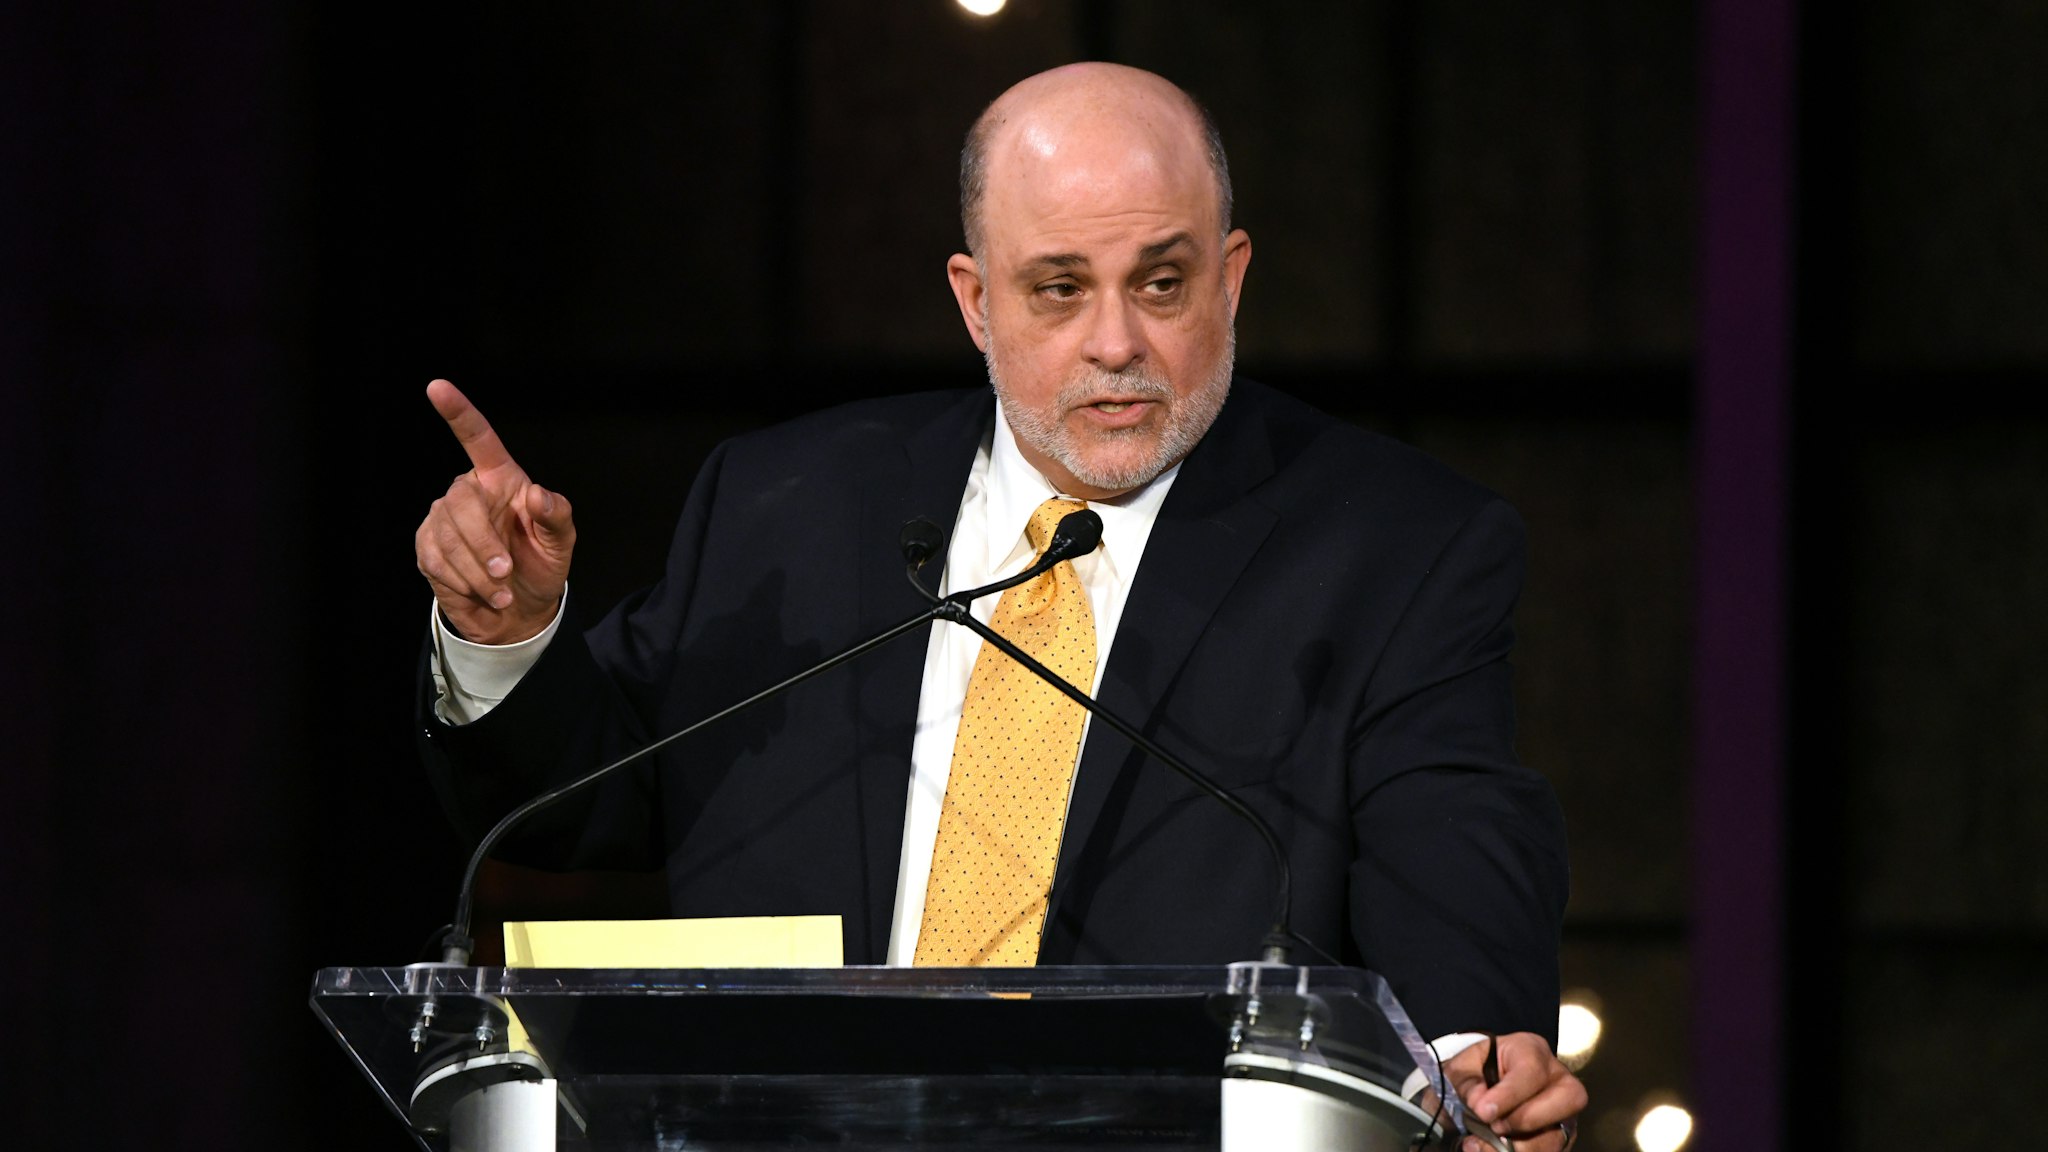 NEW YORK, NY - NOVEMBER 15: Inductee Mark Levin speaks on stage during Radio Hall Of Fame 2018 Induction Ceremony at Guastavino's on November 15, 2018 in New York City.